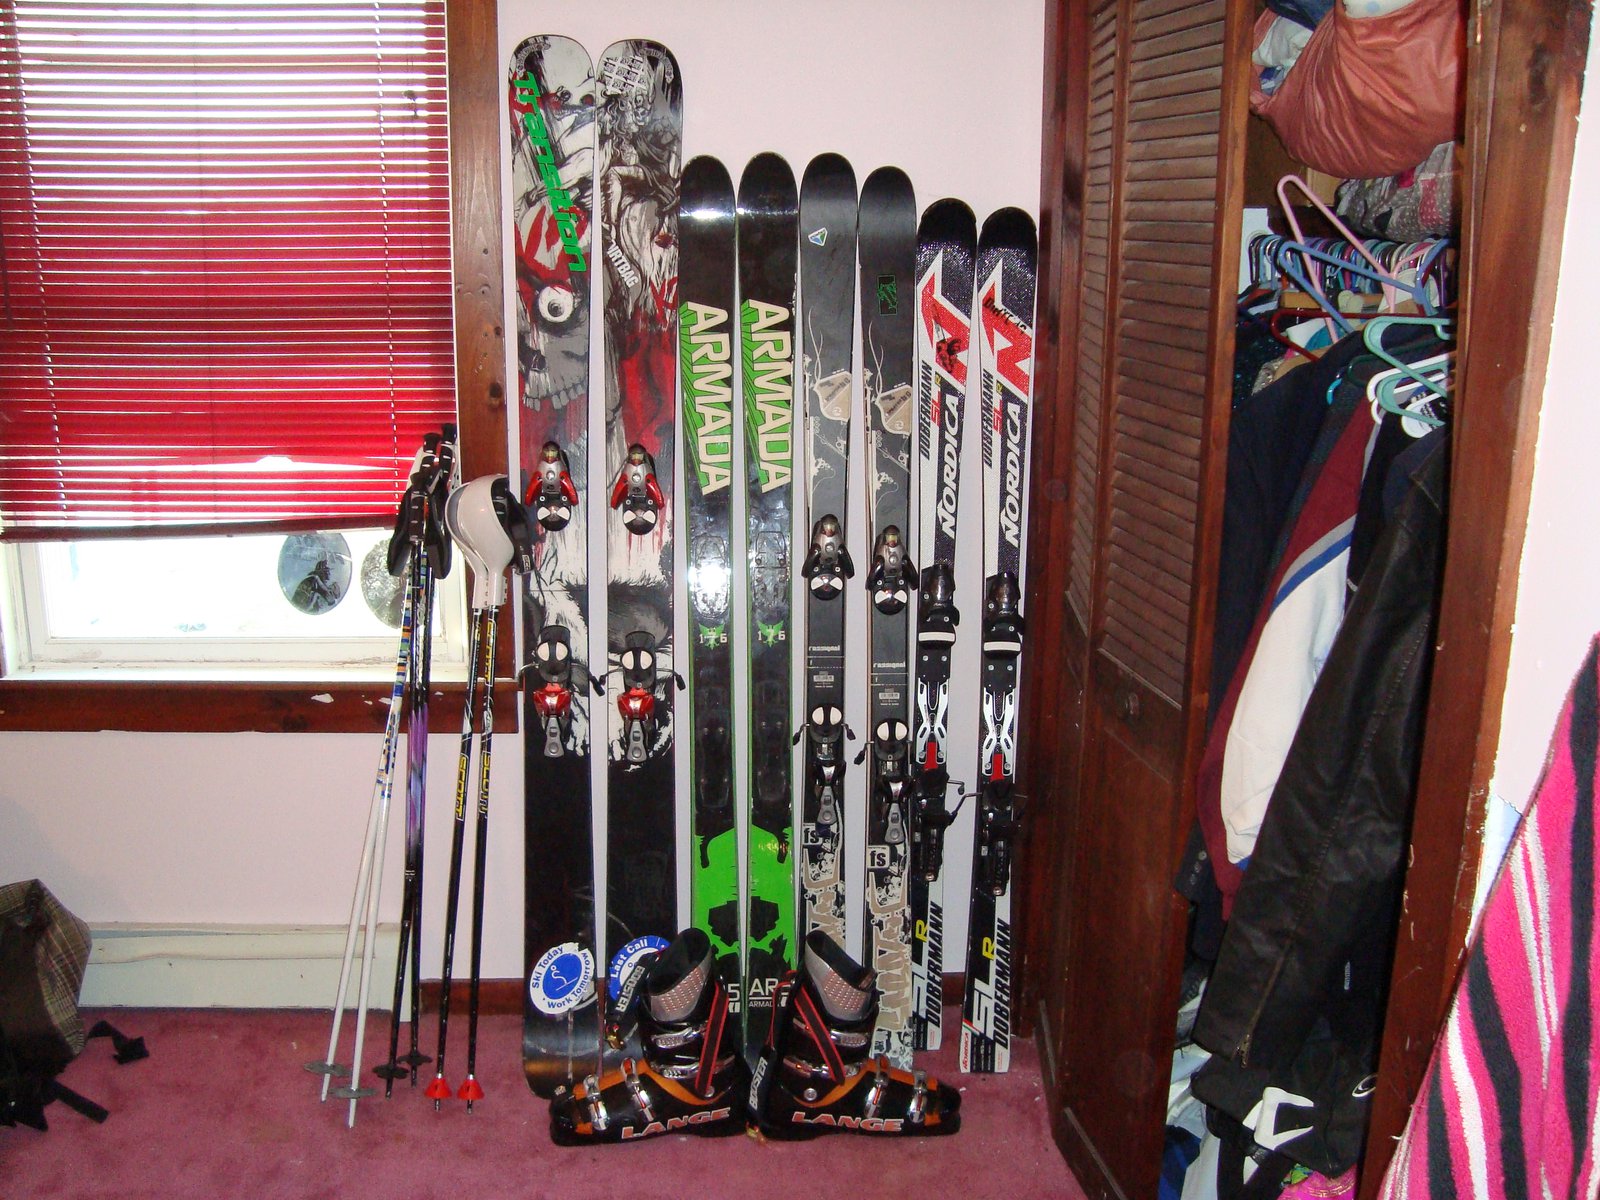 The quiver